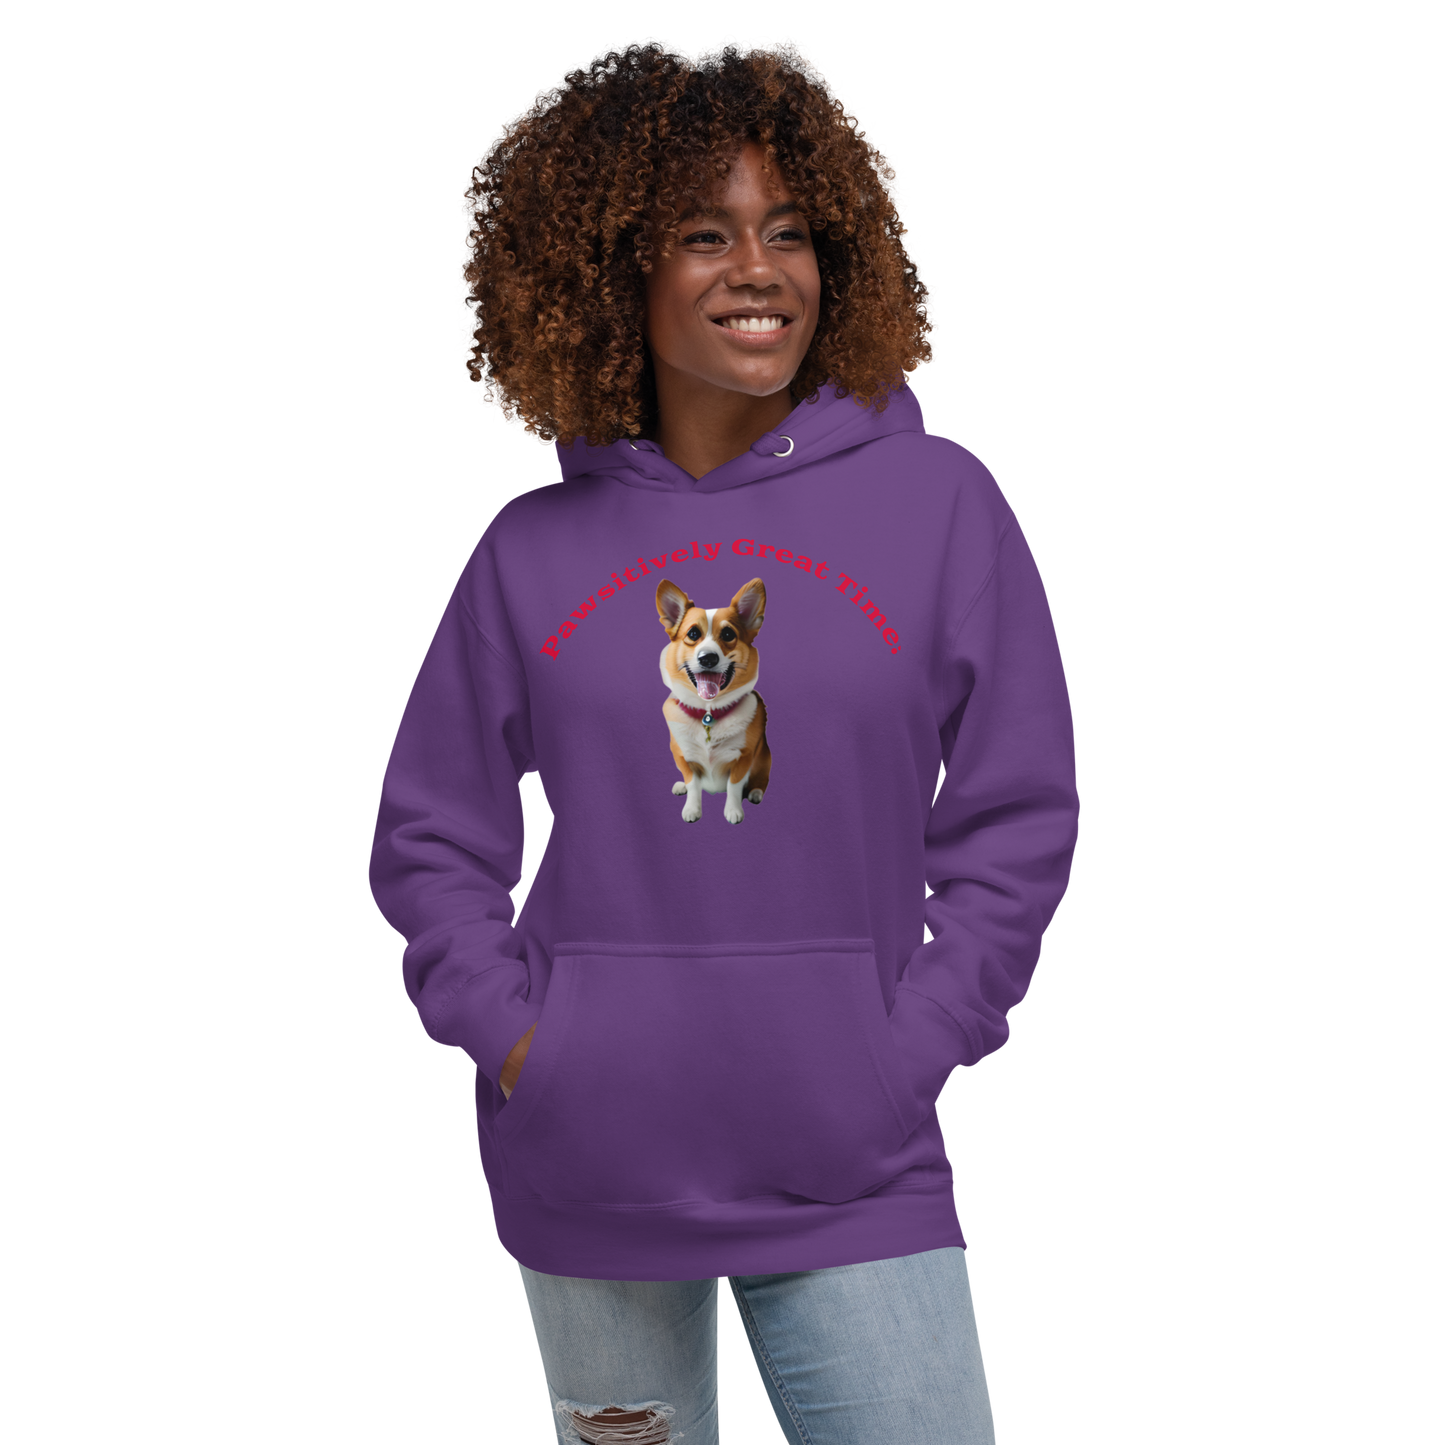 Pawsitively Great Time! - Unisex Hoodie